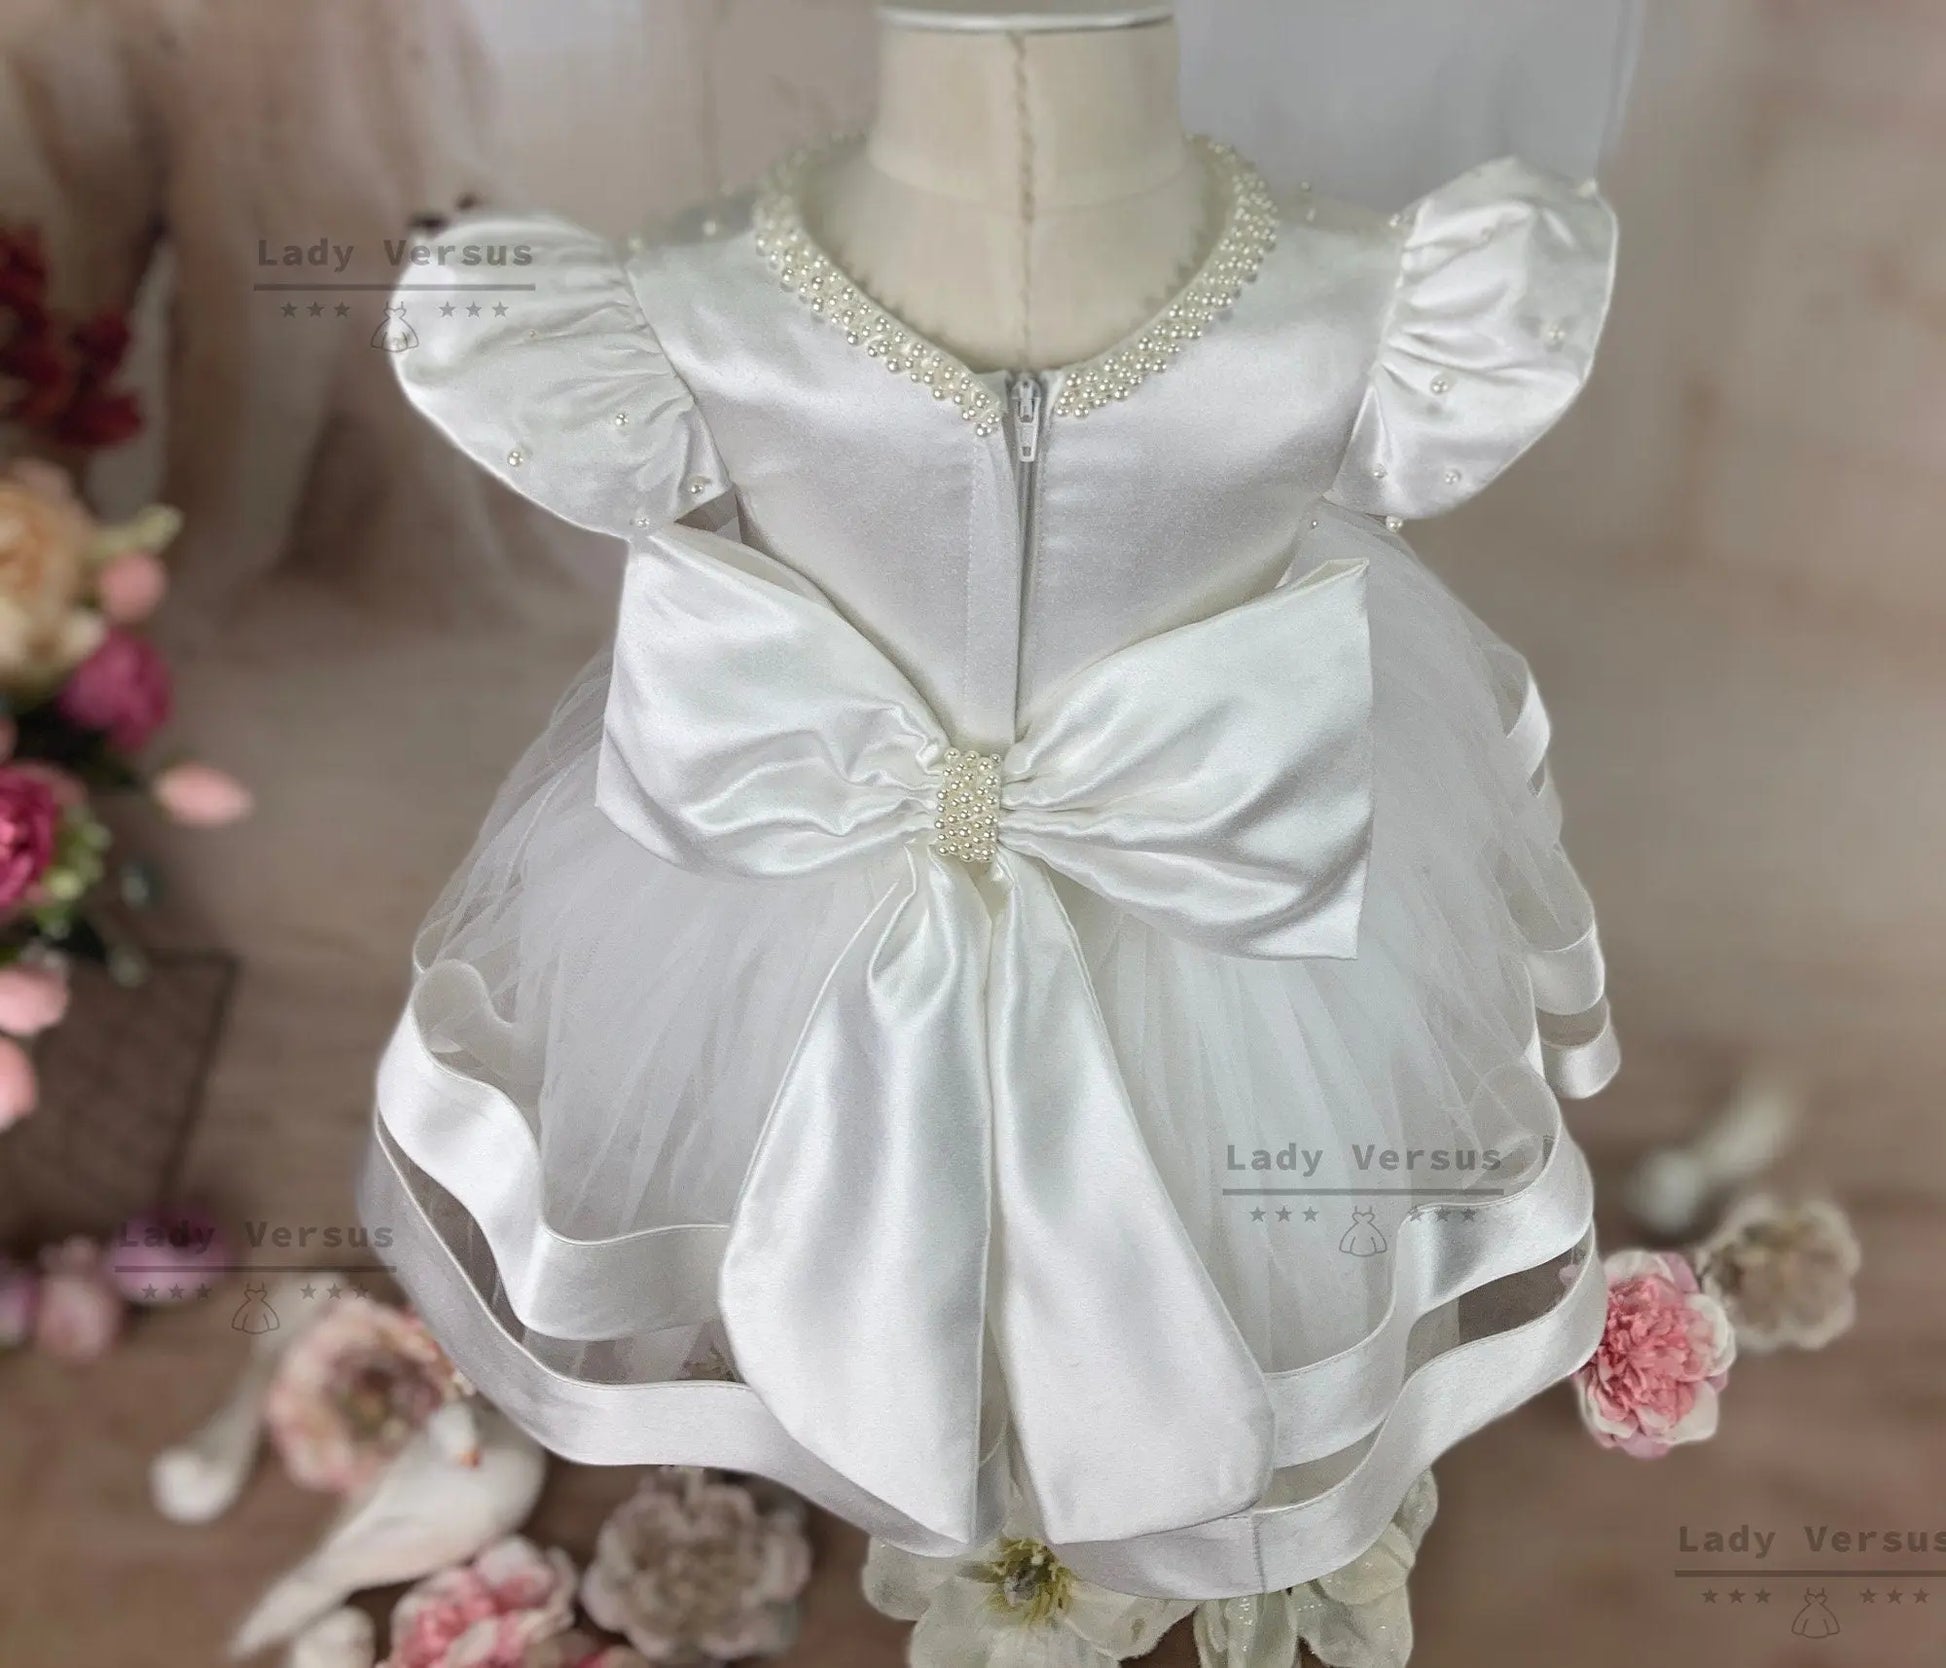 Baby Girl Baptism Dress  | Baby Girl Christening Gown | Baby Girl Baptism Outfit | birthday princess gown / flower girl dress Lady Versus